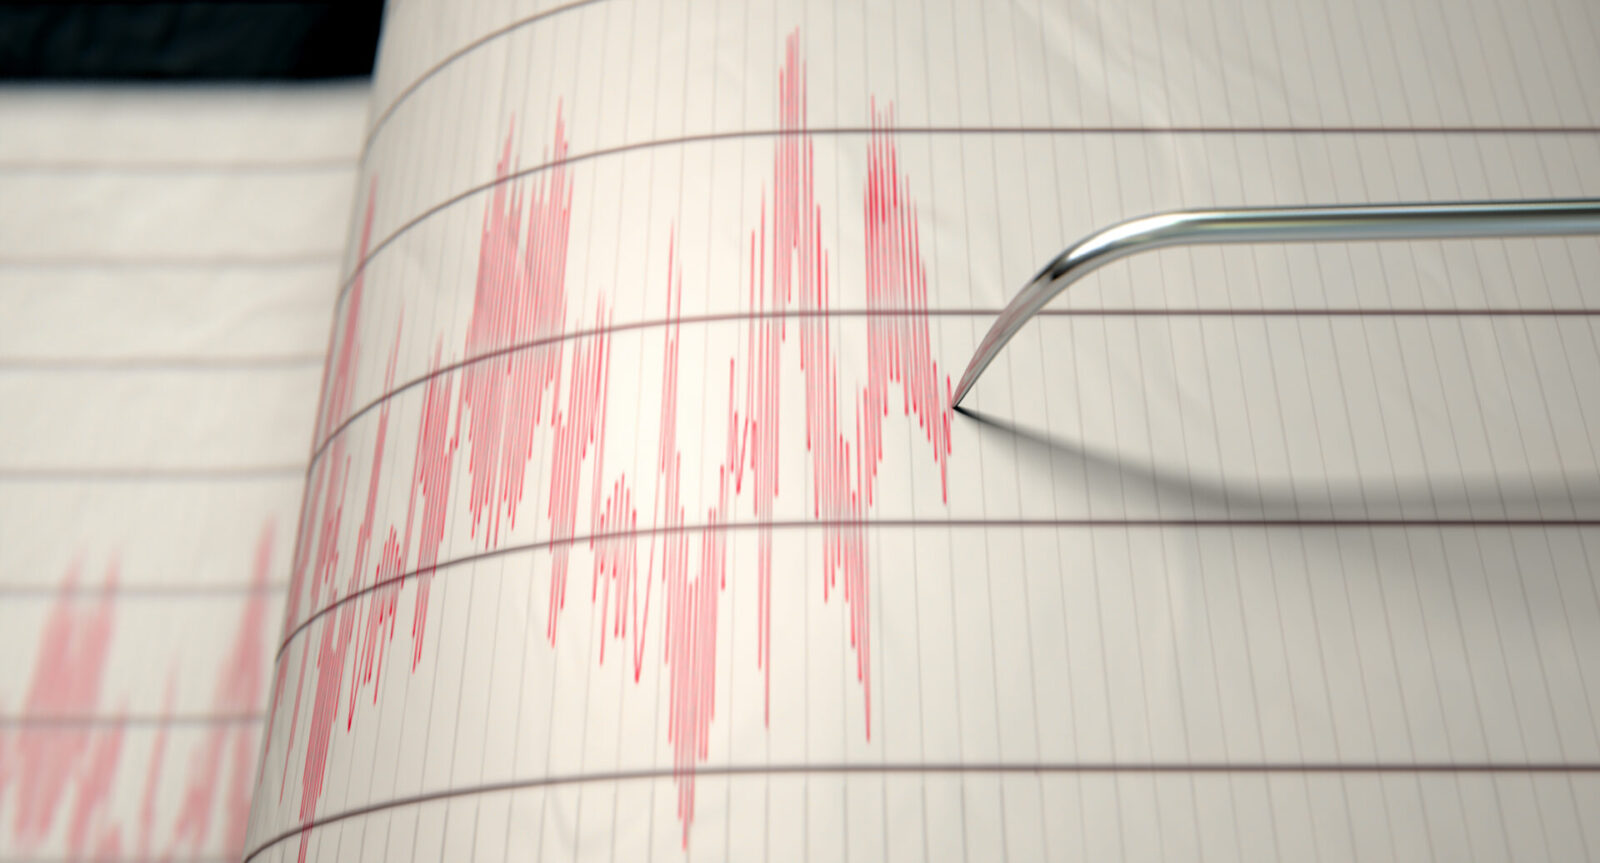 A seismograph machine in action. Photo by Inked Pixels, via Shutterstock